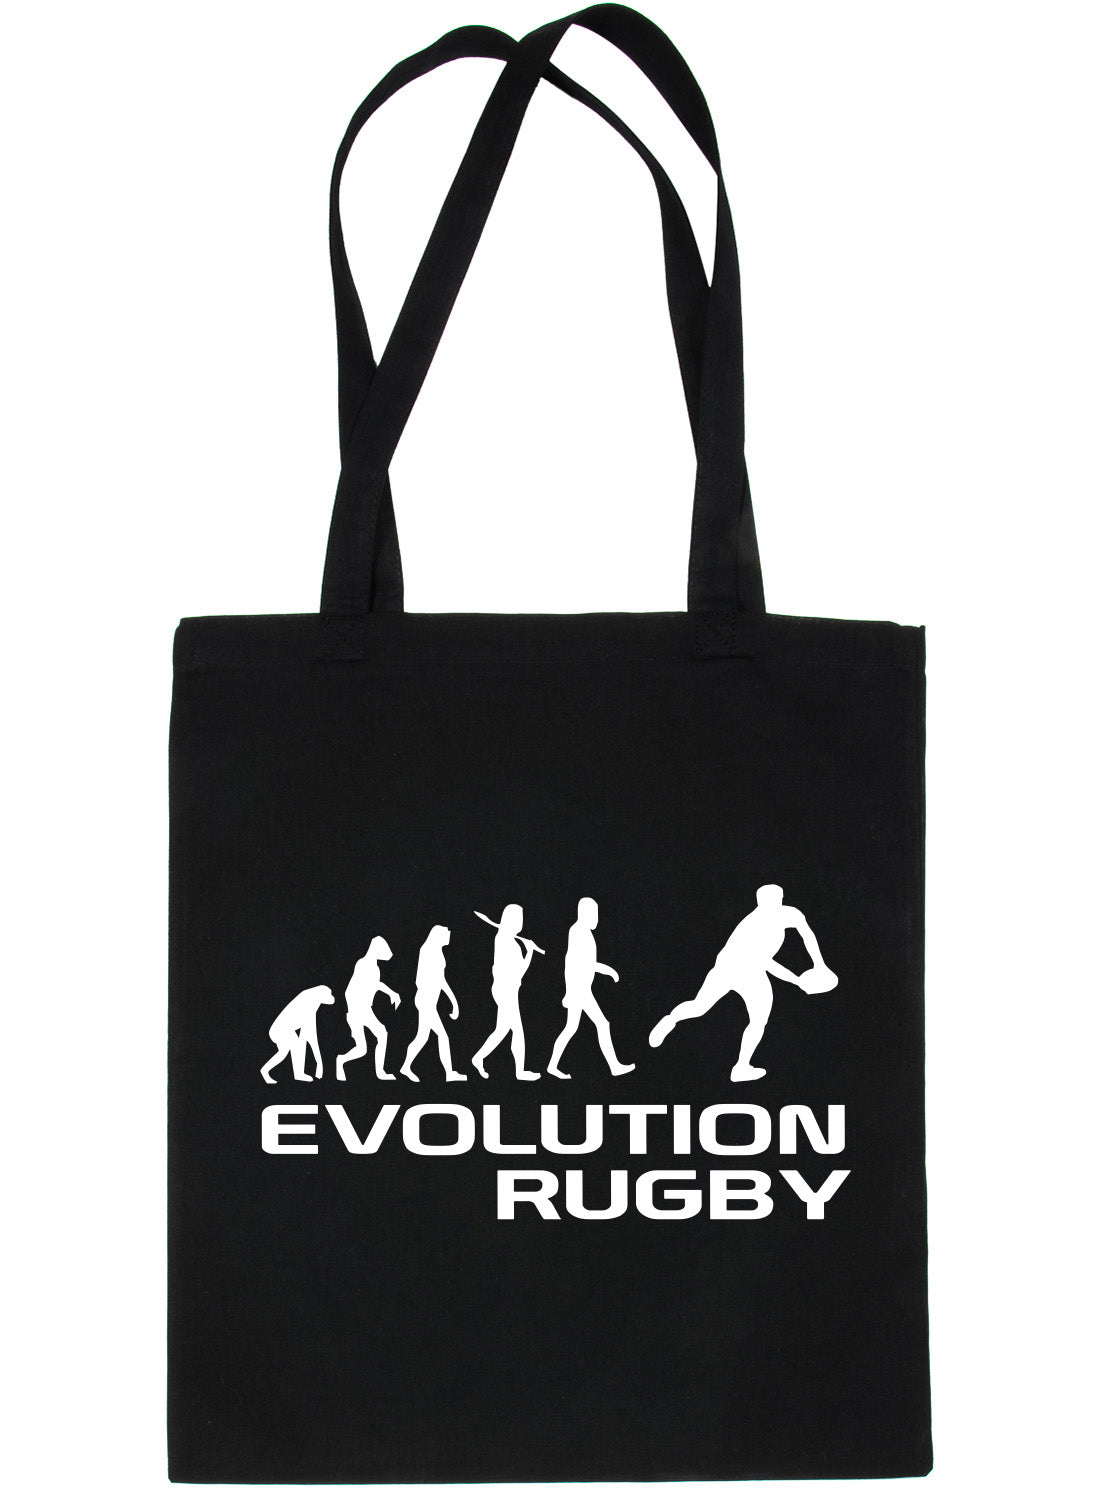 Evolution Of Rugby 6 Nations Bag For Life Shopping Tote Bag Ladies Gift